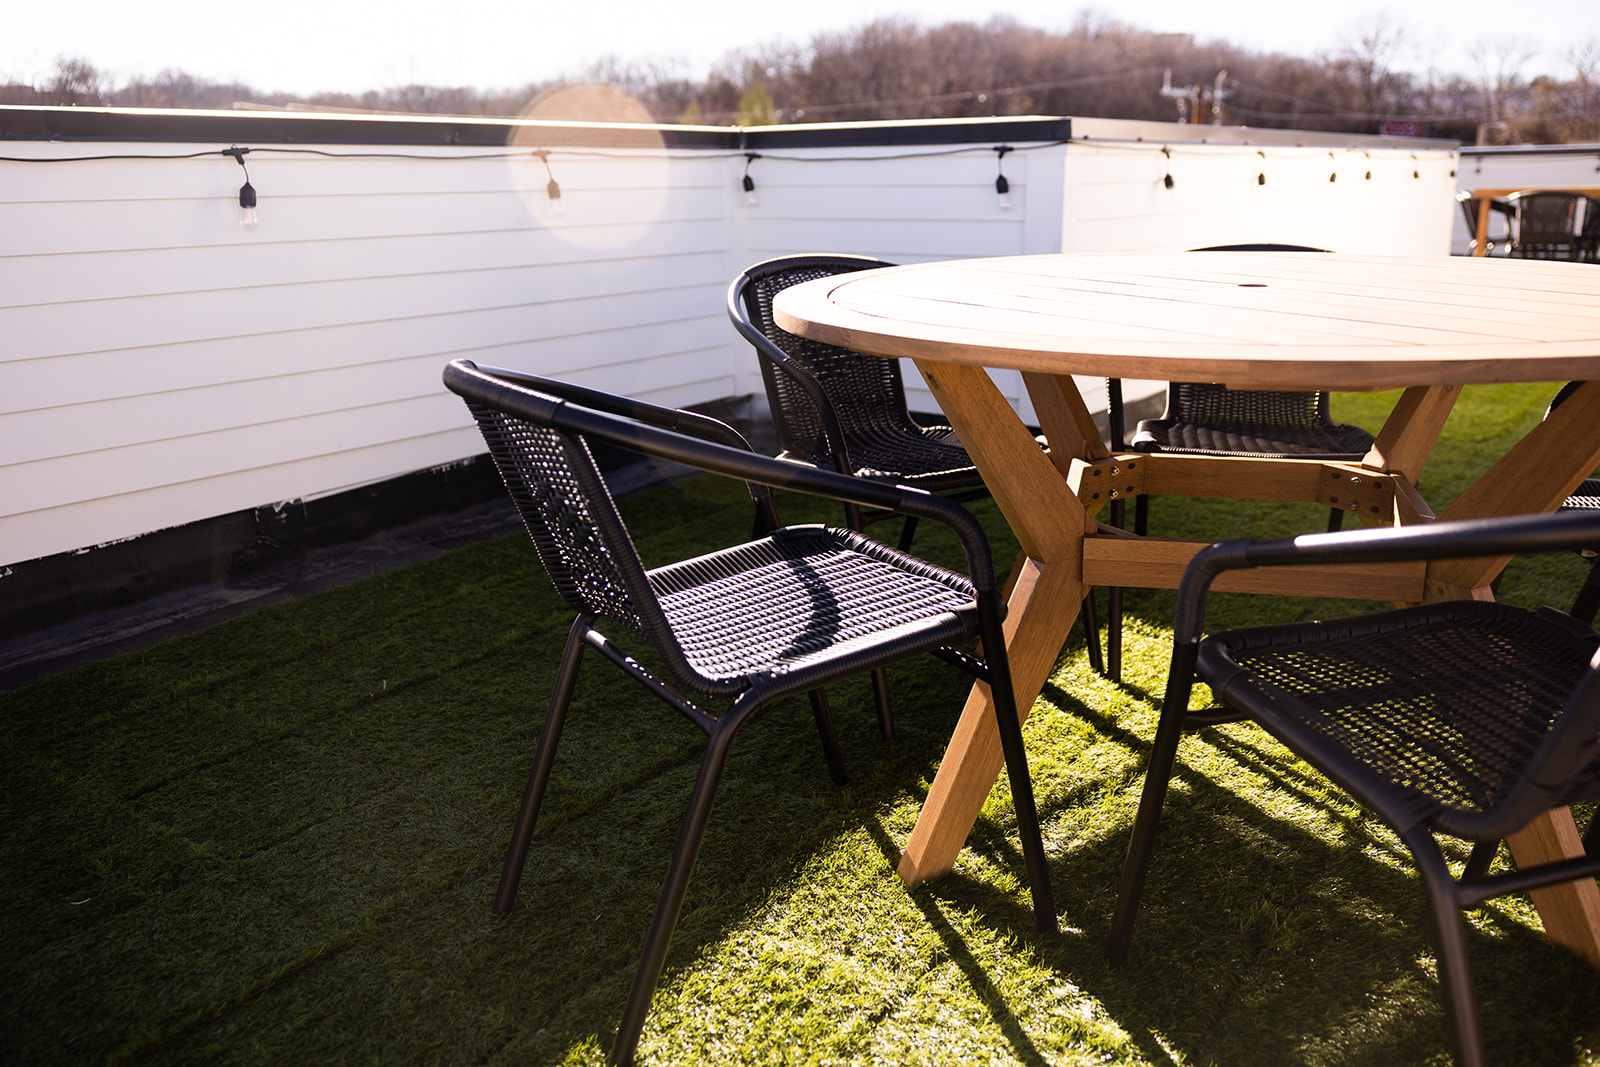 Unit 2: Private rooftop deck with lounge area, and outdoor dining. (4th floor)